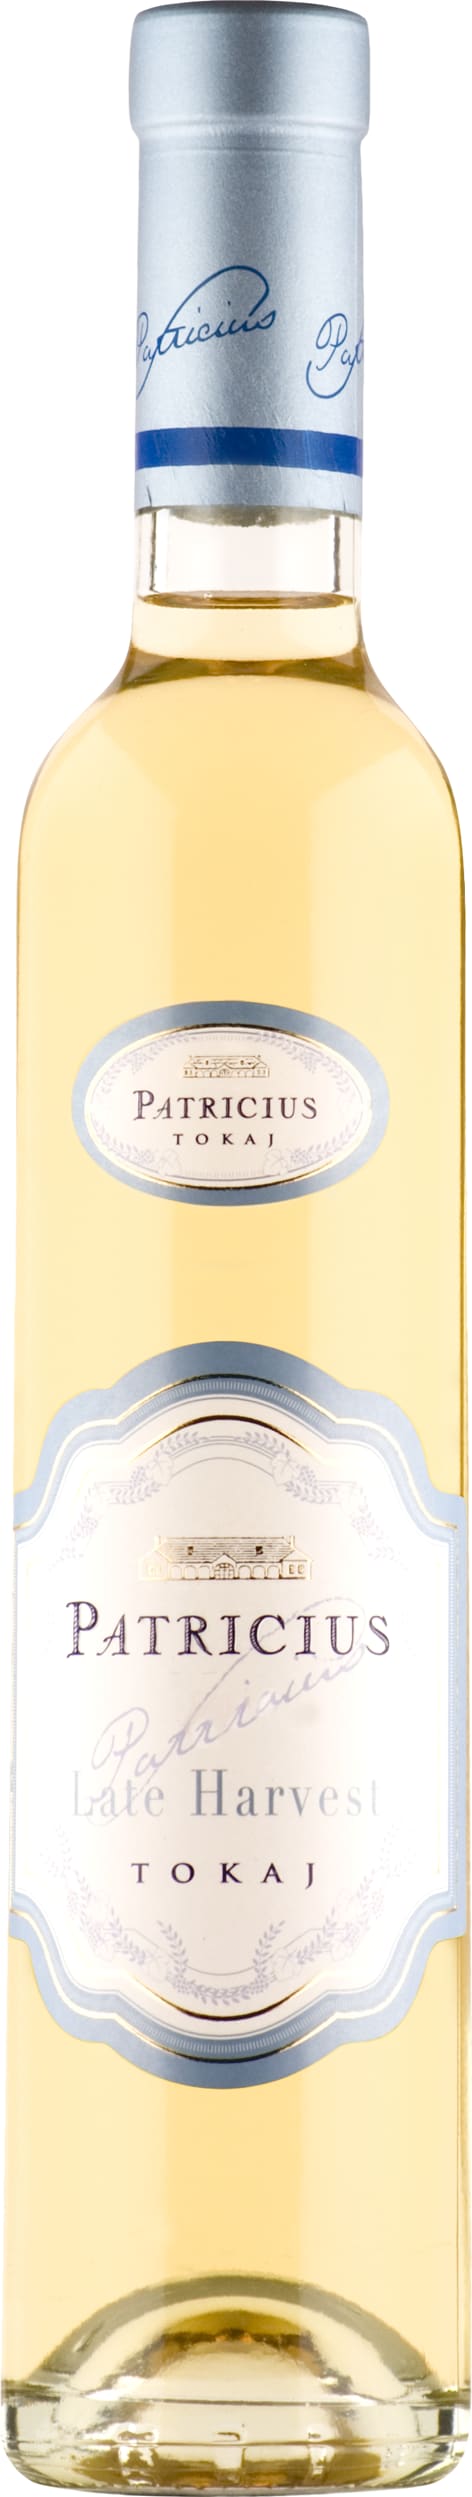 Patricius Late Harvest Tokaji Katinka 375cl 2021 37.5cl - Buy Patricius Wines from GREAT WINES DIRECT wine shop